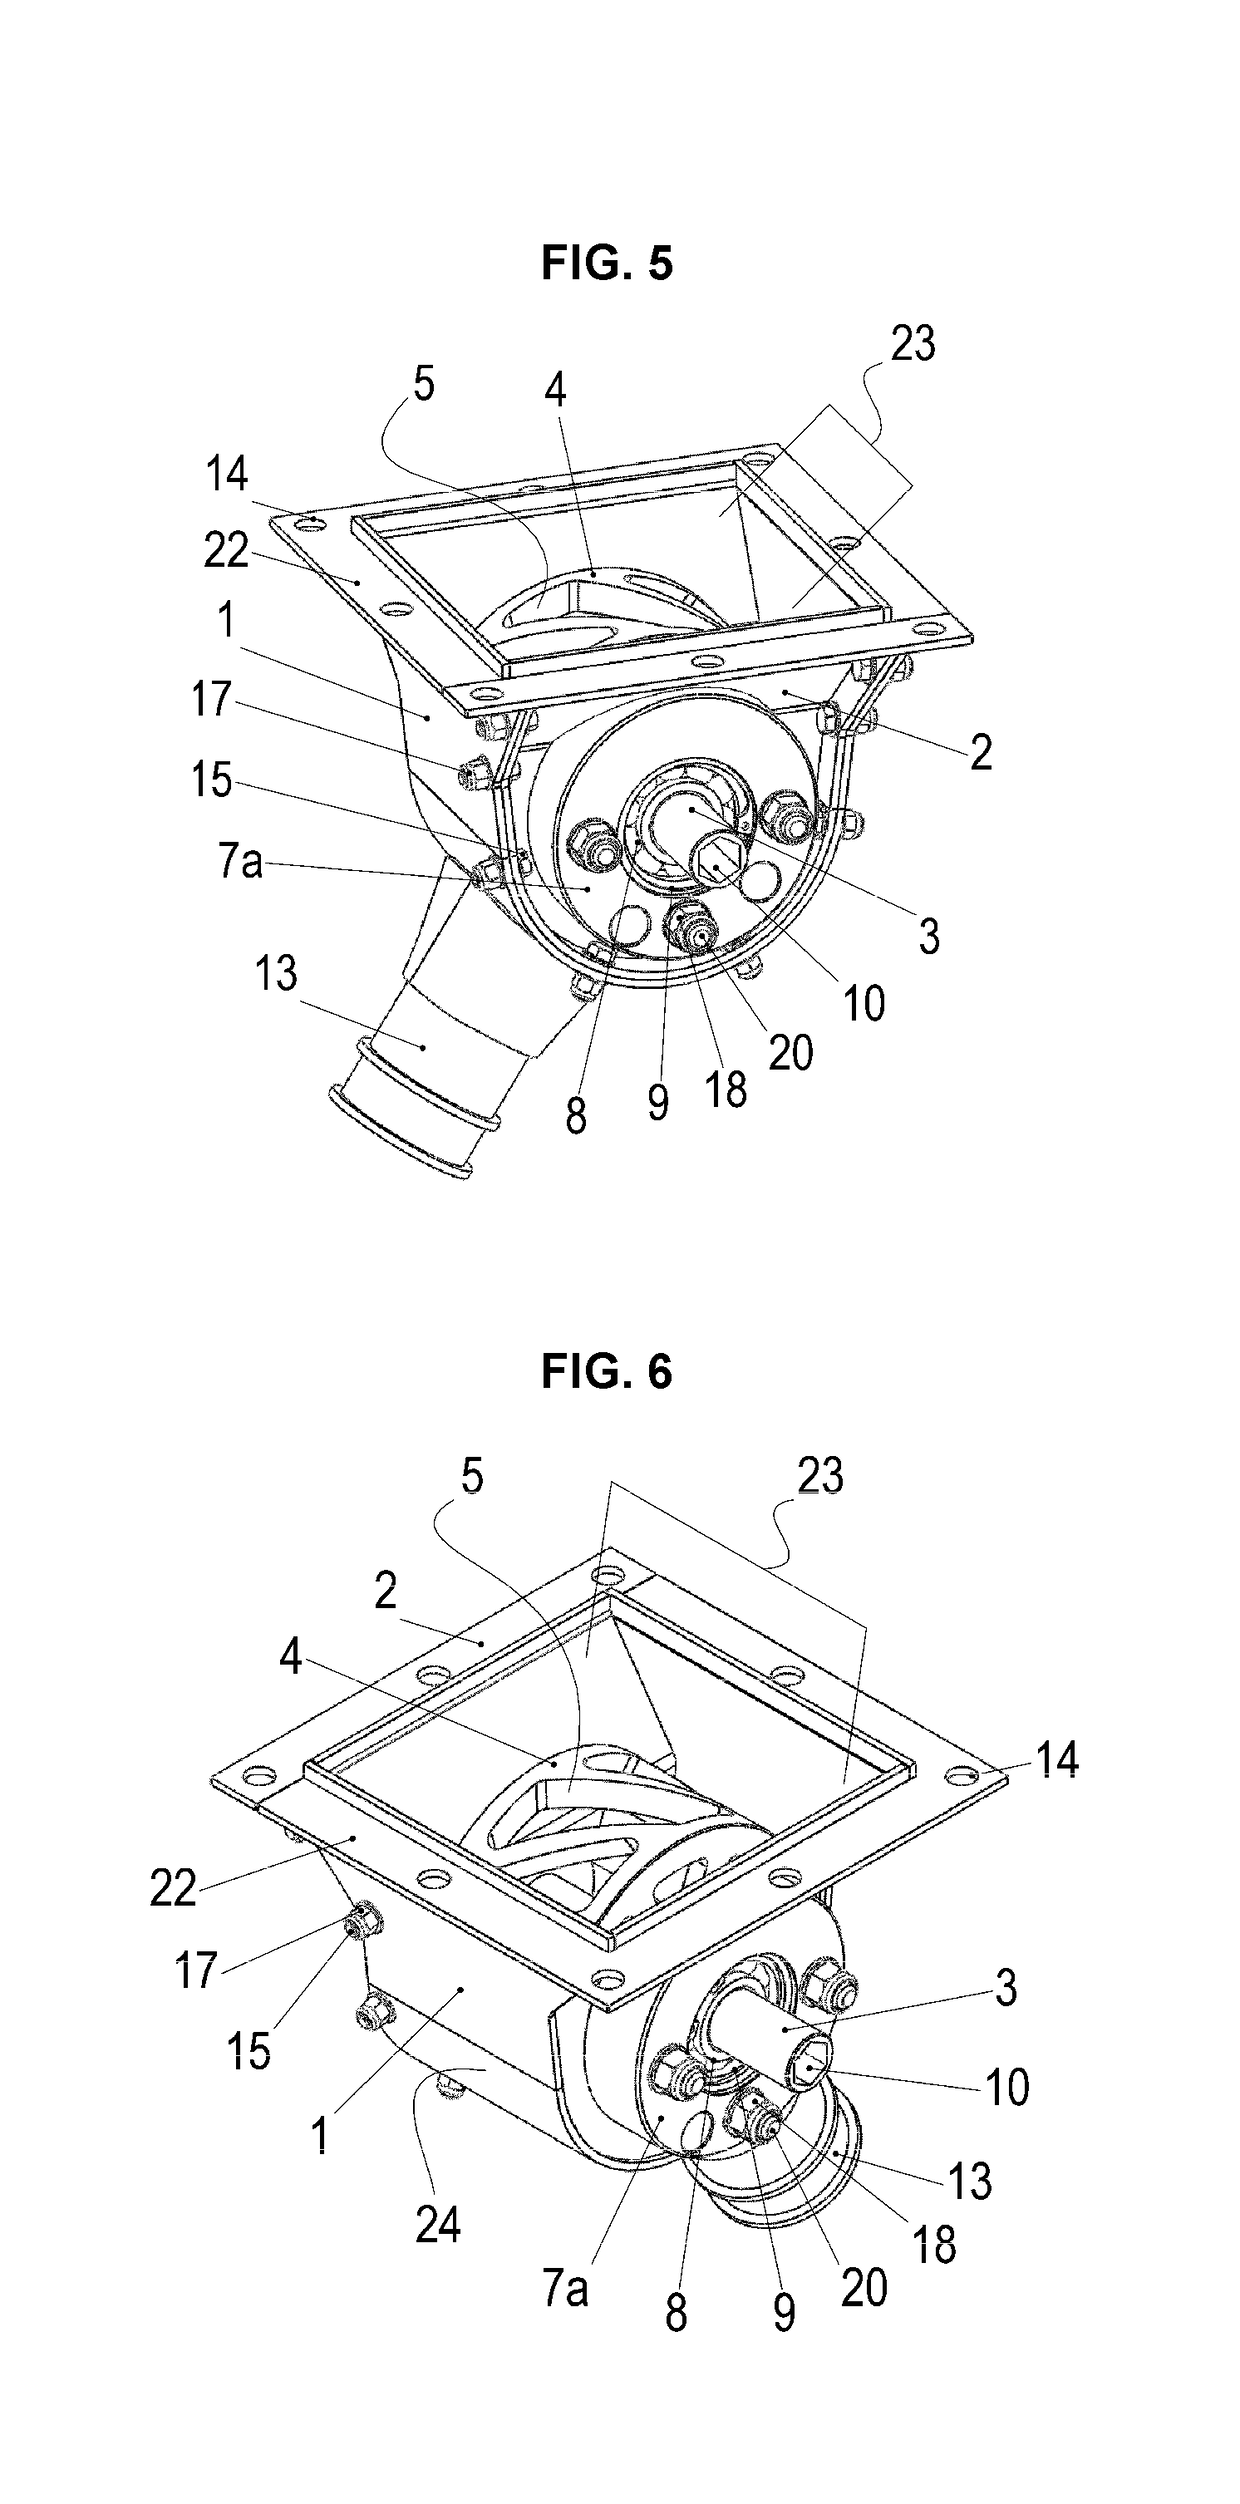 Apparatus For Precision Volumetric Metering And Distribution Of Solid Inputs Used In Agriculture